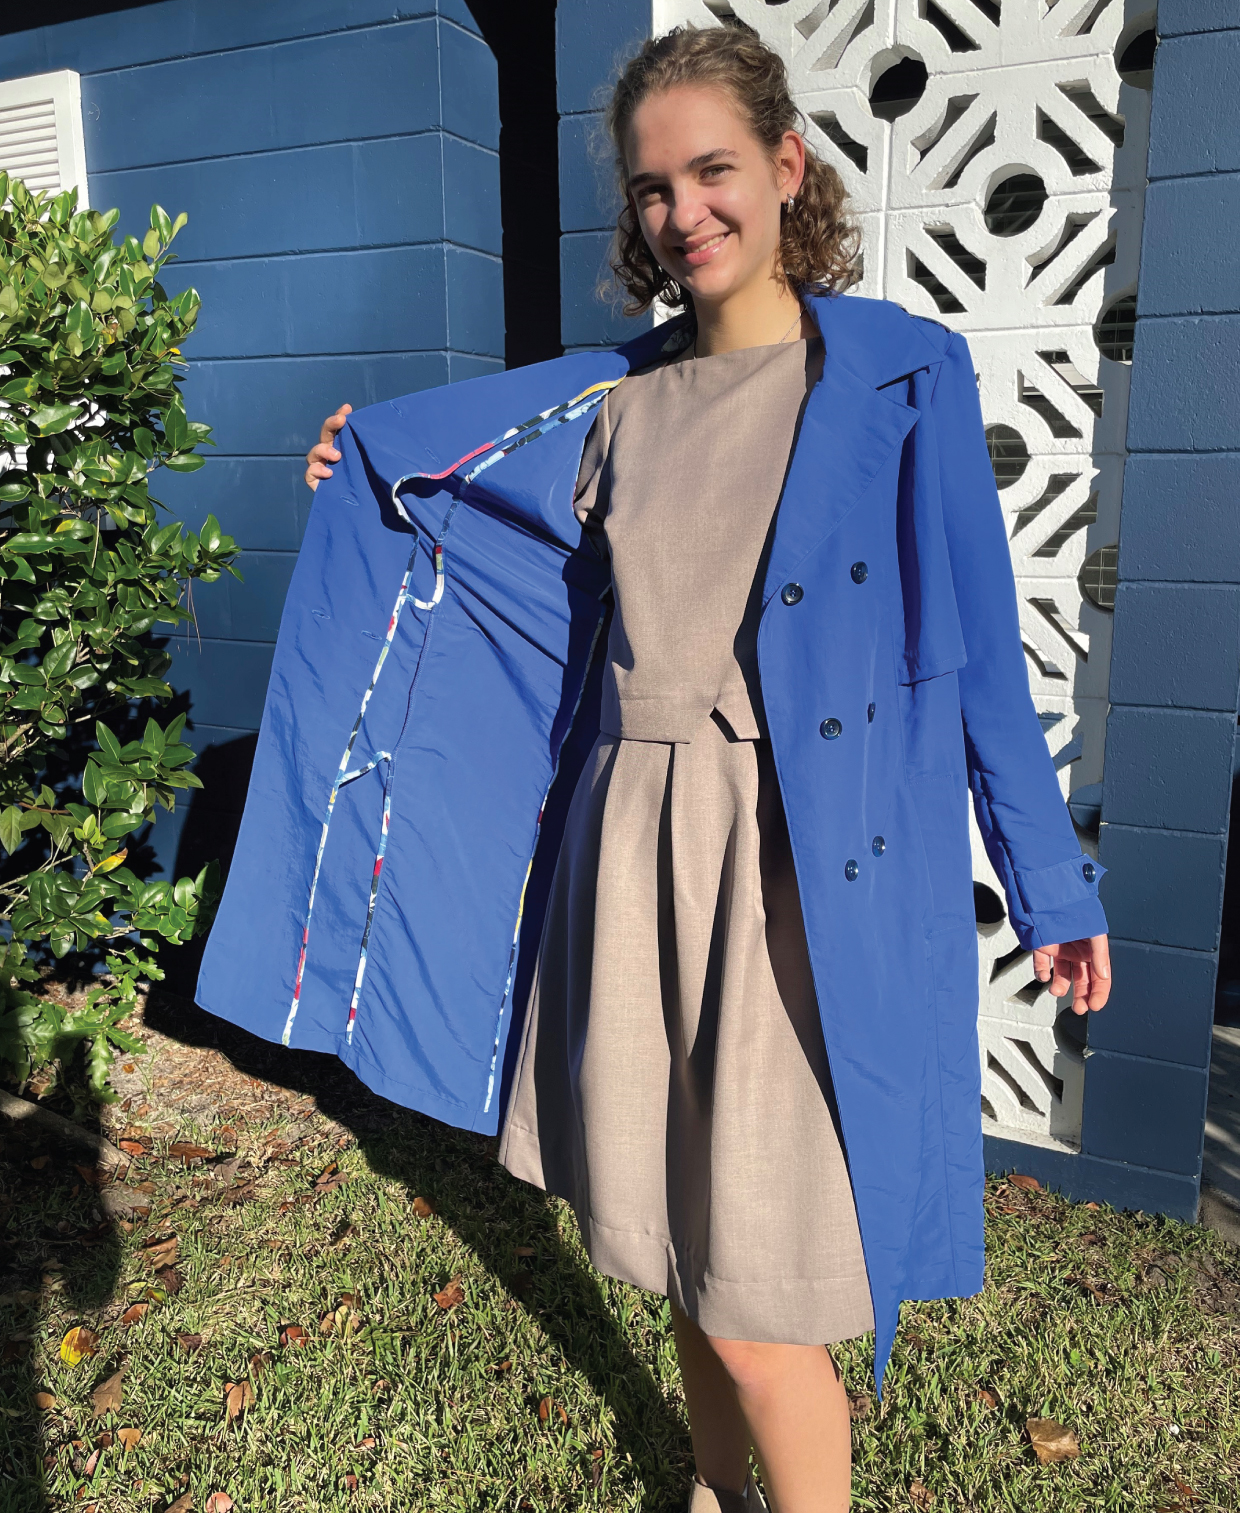 Prado Trench Coats From Our Testers | Blog | Oliver + S